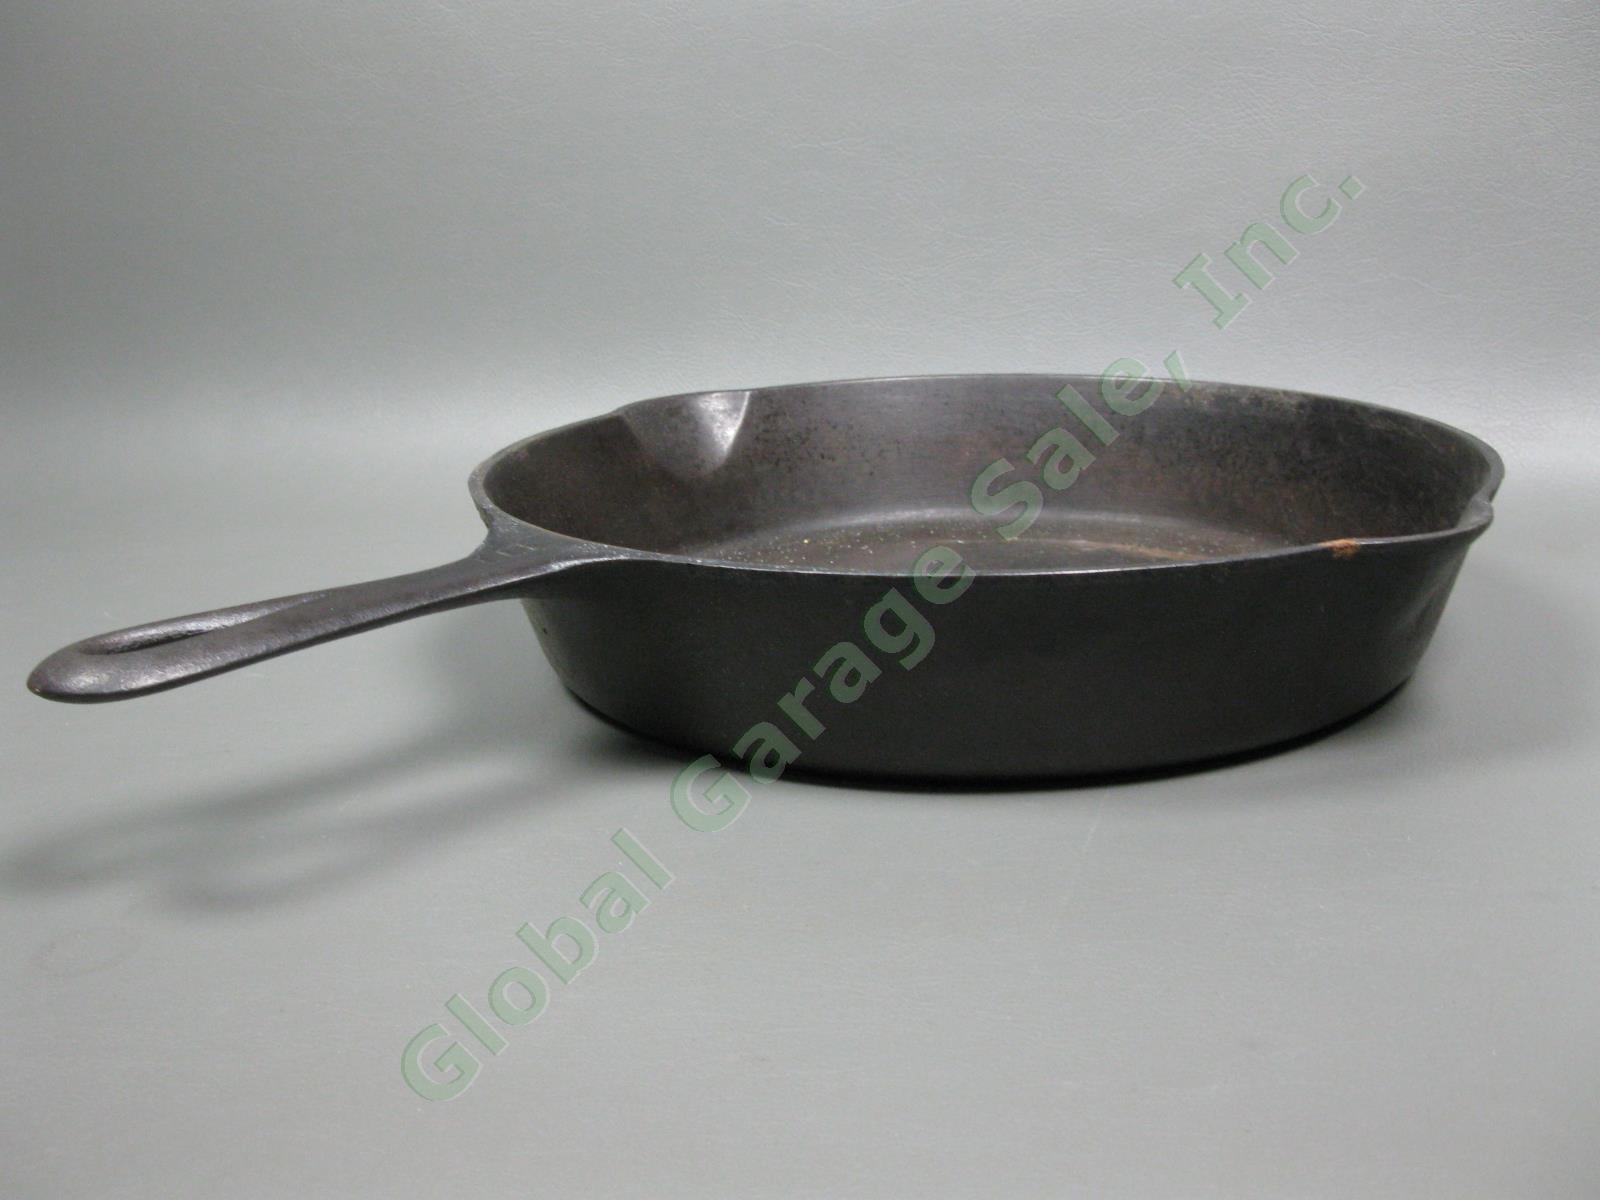 Vintage Griswold No-9 710-B Large Cast Iron Frying Pan Skillet Cookware Erie PA 5